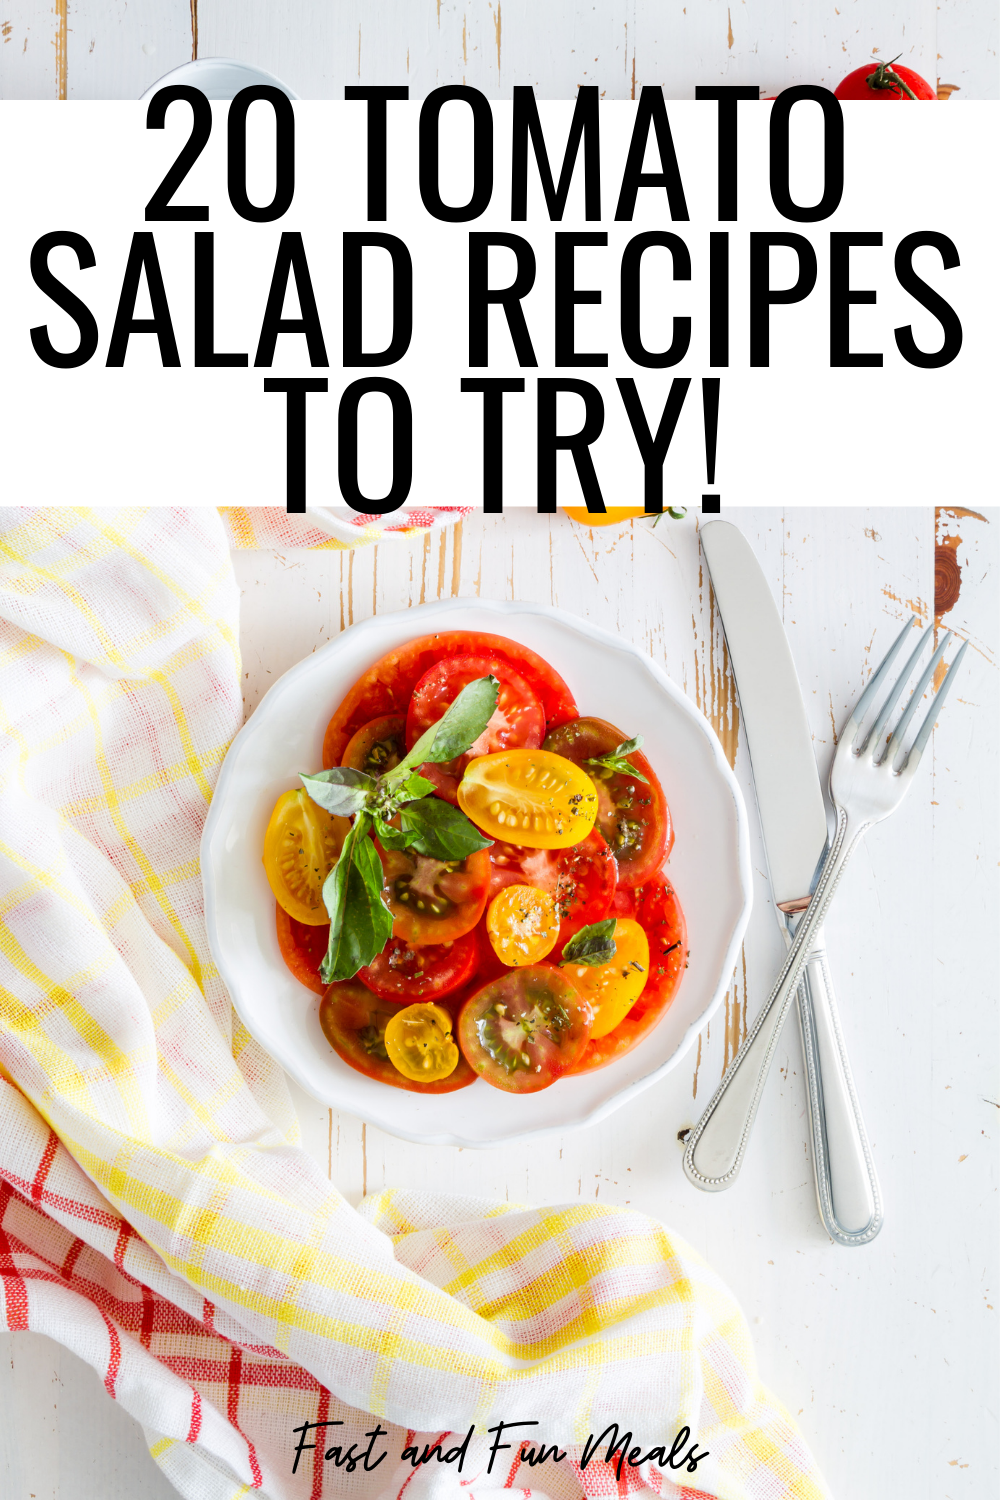 Making tomato salad recipes is super easy. Whether you’re looking for something to pair with your crunchy veggies and crackers, something to add to your salad jars, or you just want some unique burger toppings, you have to try these recipes. 